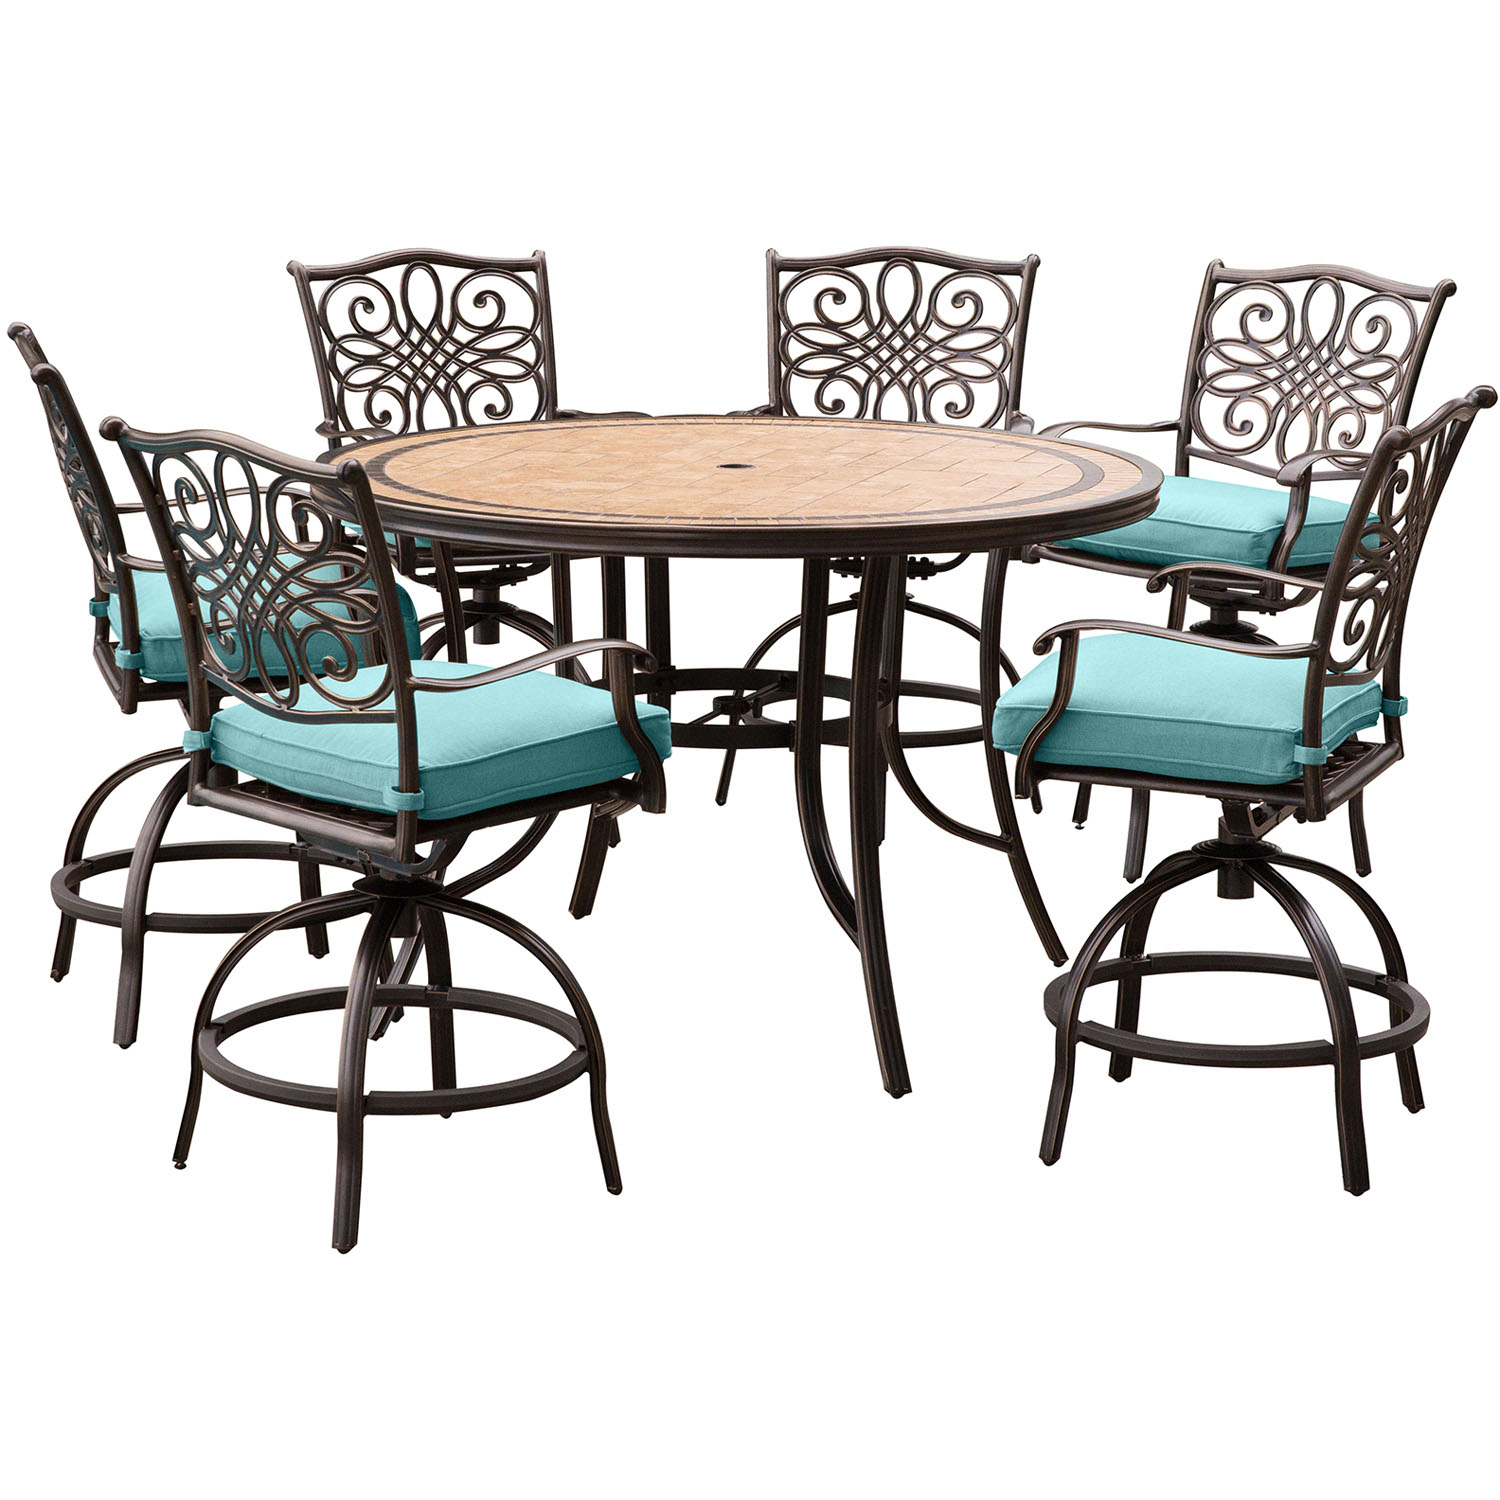 Hanover Monaco 7-Piece High-Dining Set in Blue with a 56 In. Tile-top Table and 6 Swivel Chairs - image 1 of 10